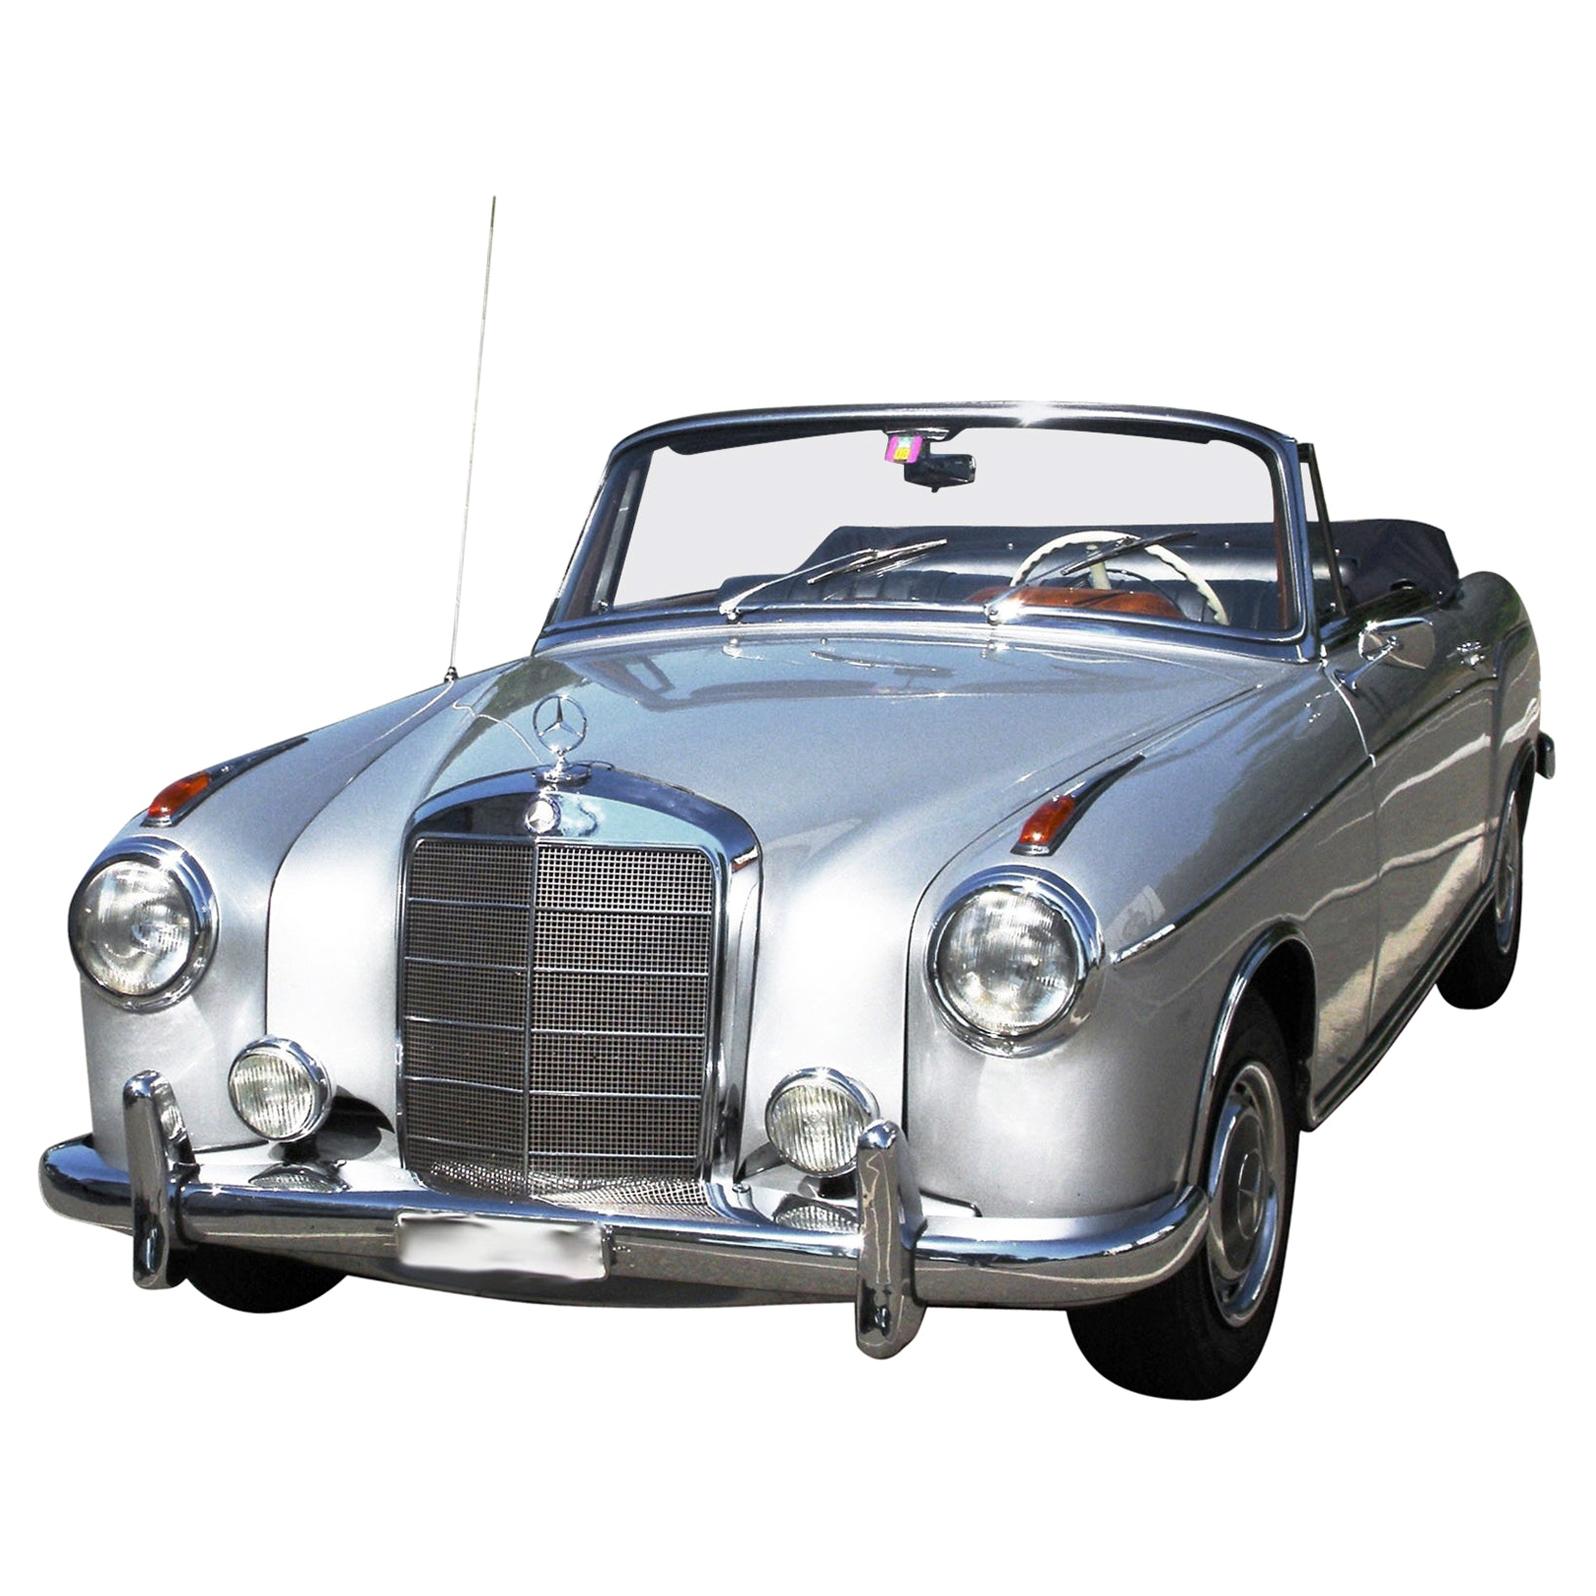 Mercedes Convertible W180 We Think Lewis Hamilton Would Love This Classic Car For Sale